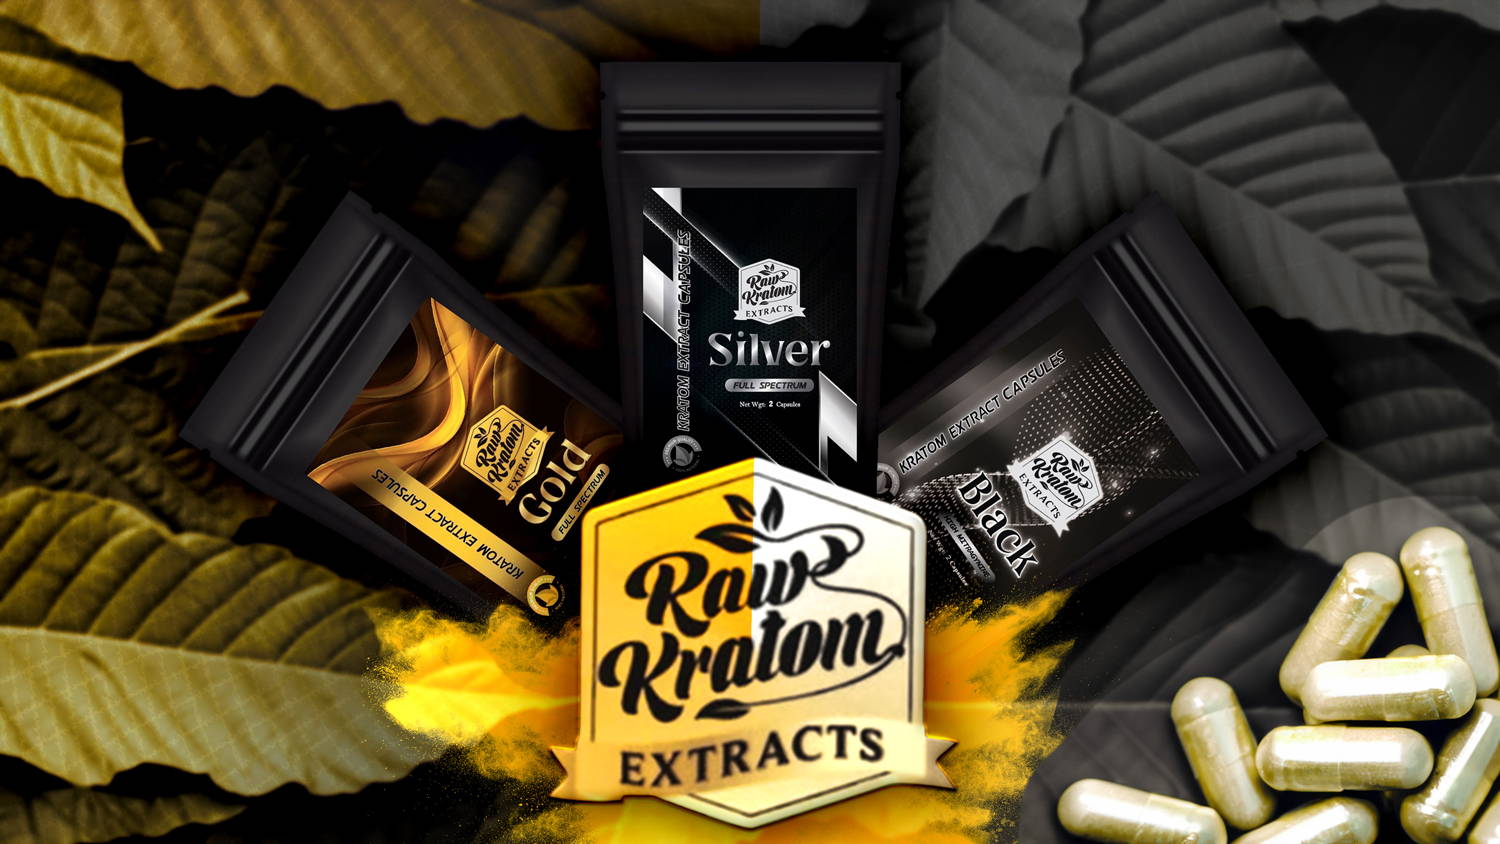 Raw Kratom Extract Capsules Bundle Black, Silver, and Gold Banner